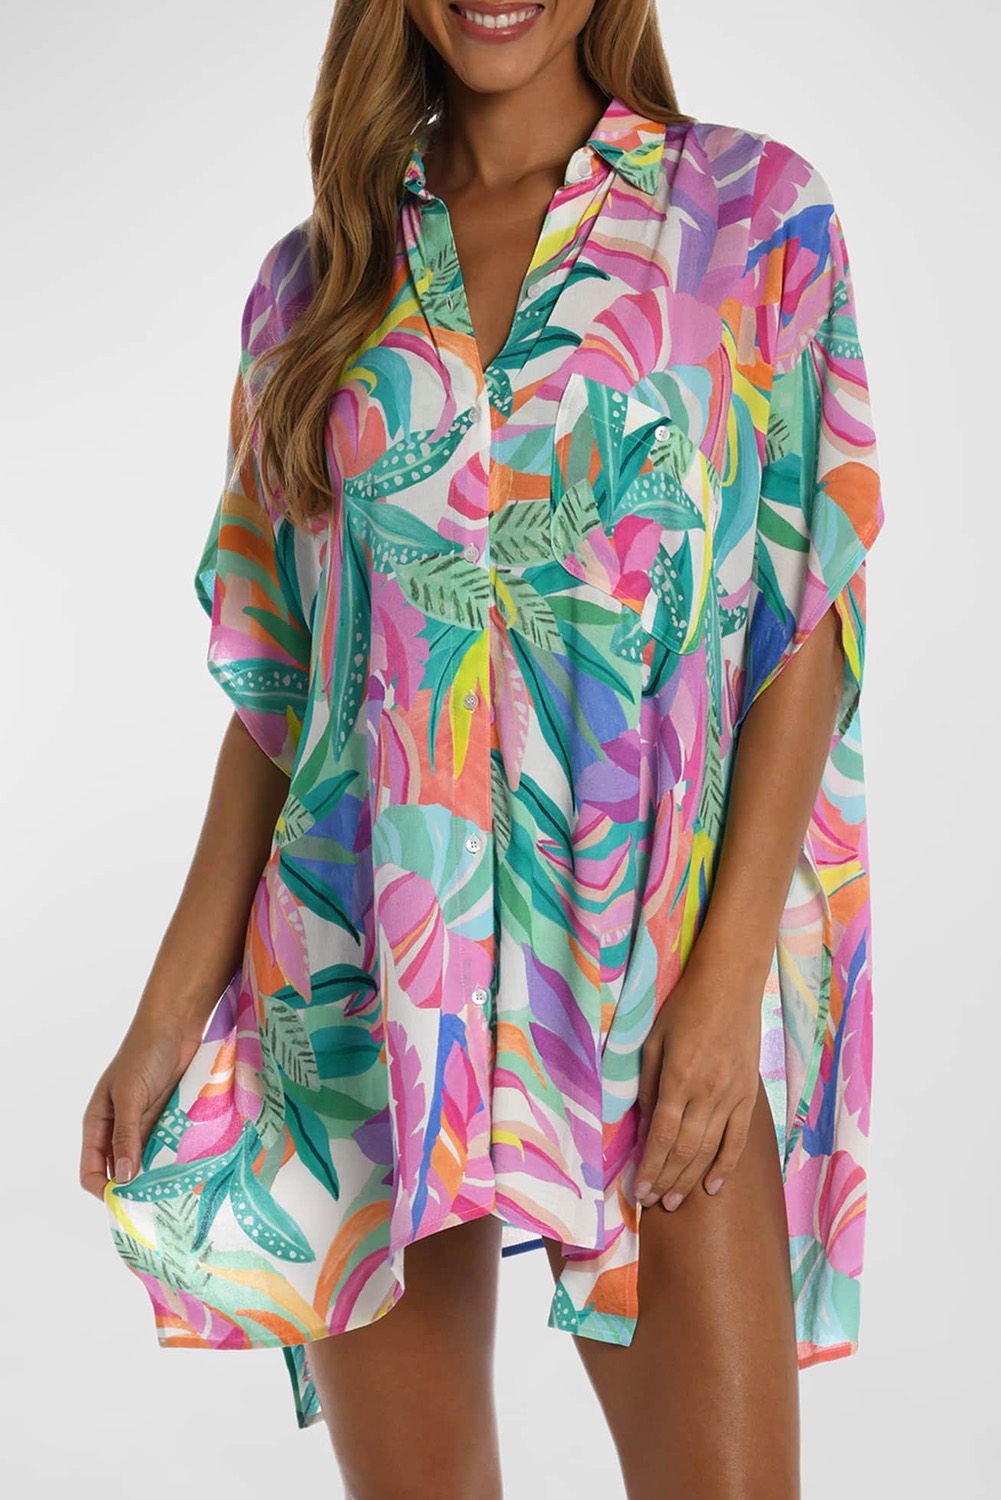 Shewin Wholesale Customized Multicolor Tropical Print Button-up SHORT Sleeve Beach Cover Up